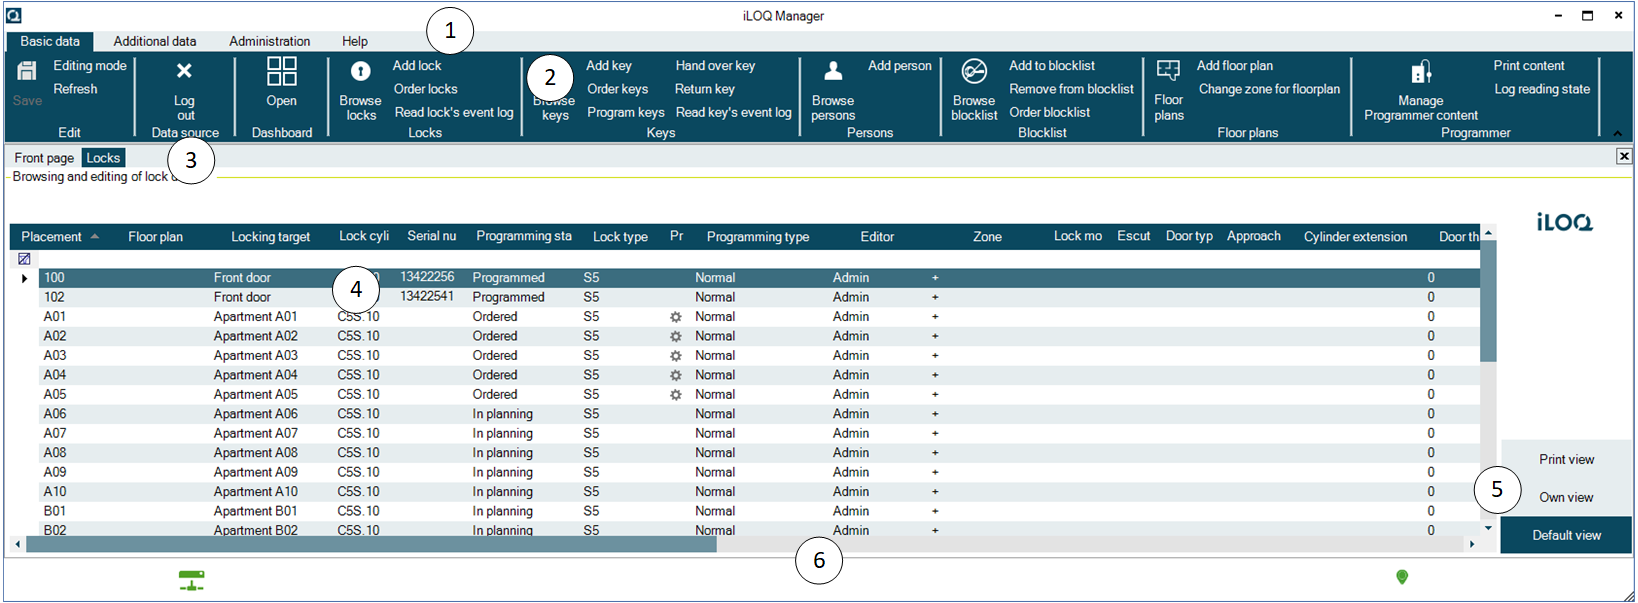 iLOQ 5 Series Manager User Interface